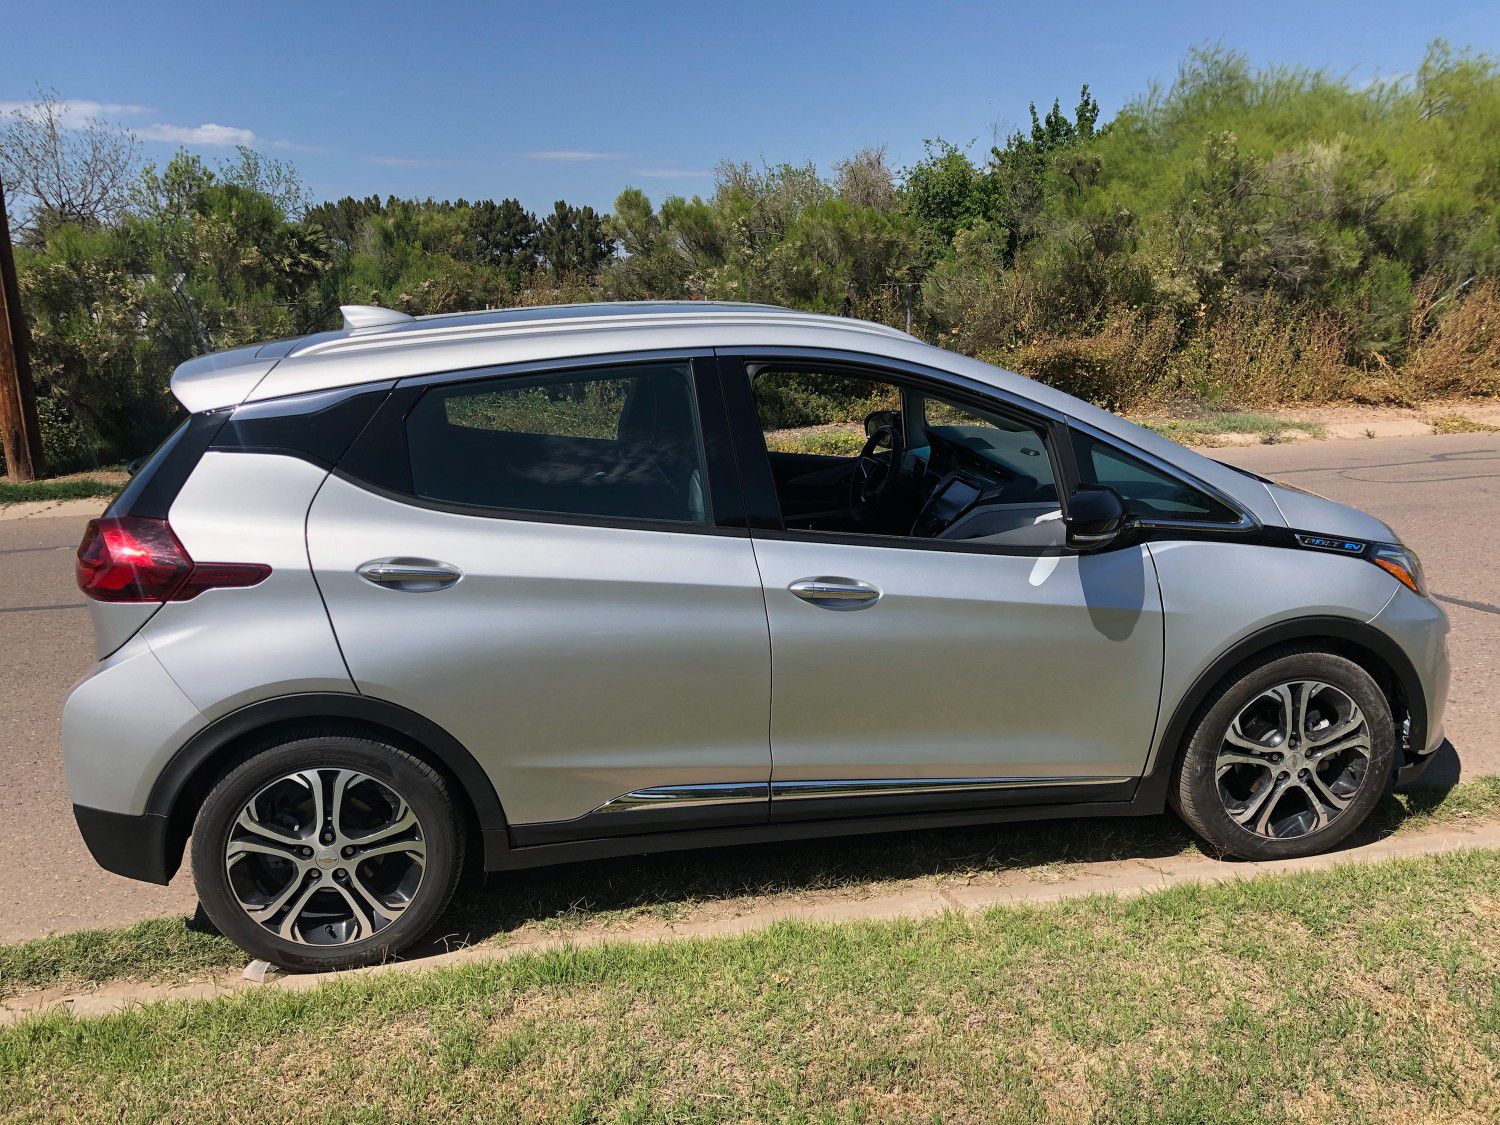 2017 Chevy Premier Bolt - Free Level 2 Home Charger